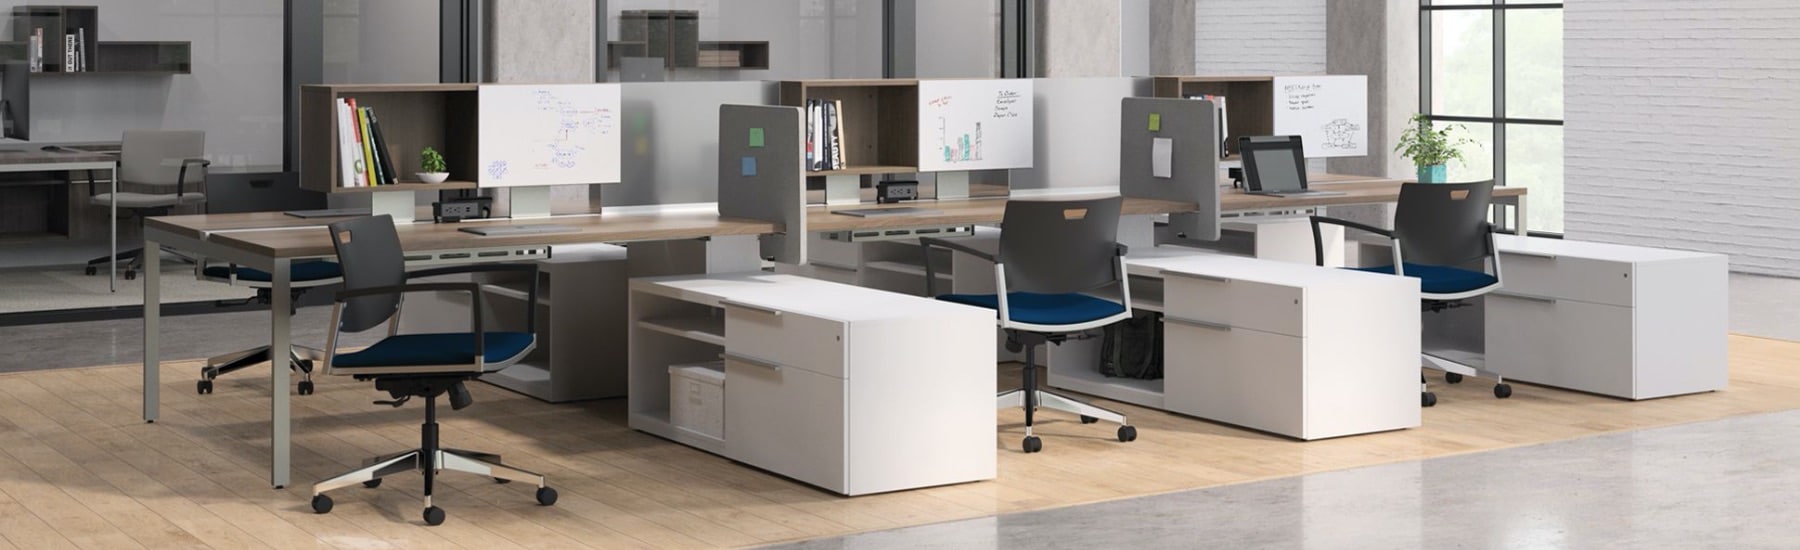 Corporate Office Furniture Collections hero image